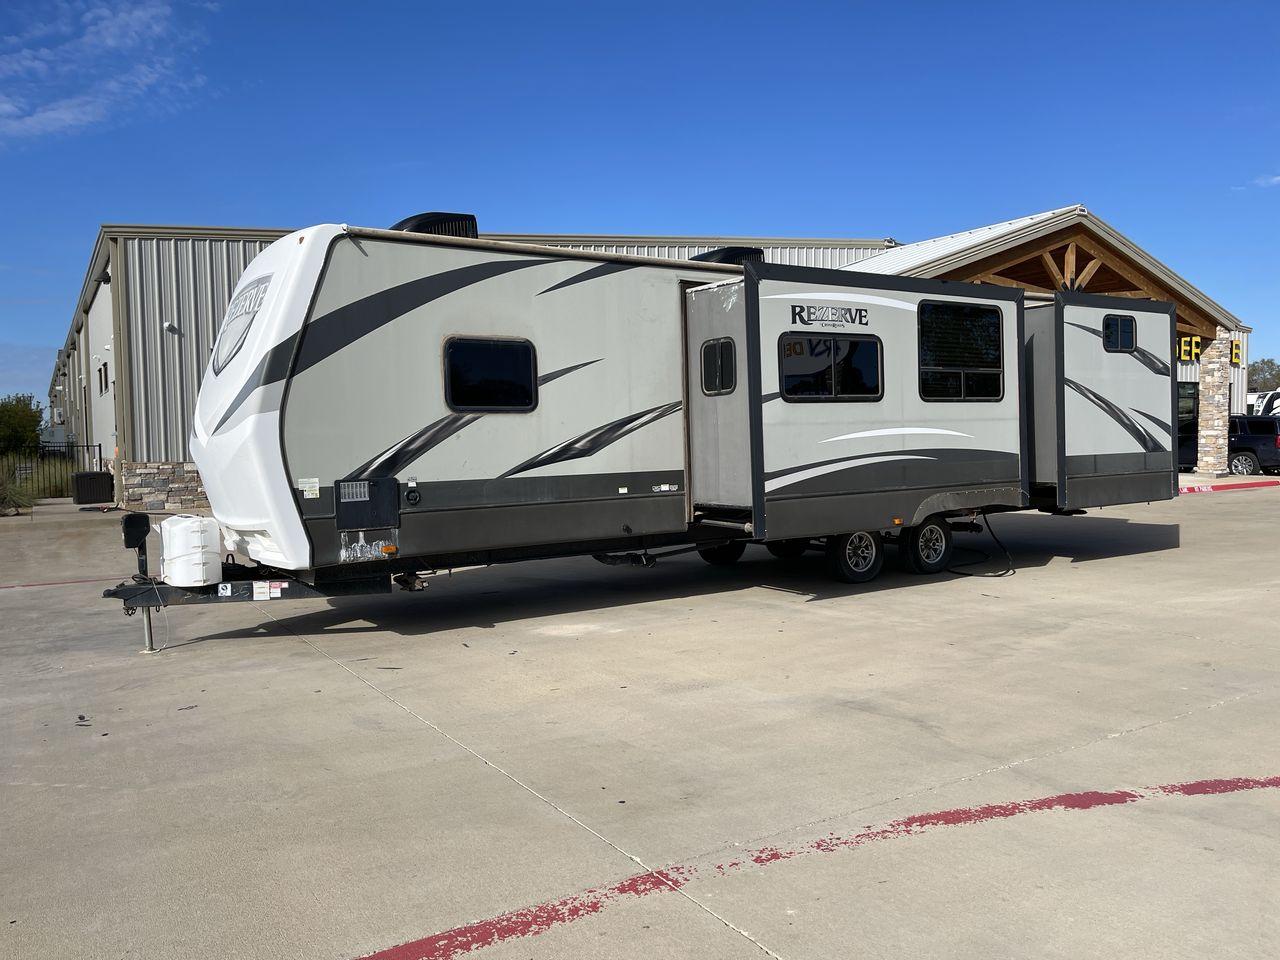 2017 WHITE VOLANTE RTZ33BH (4V0TC3327HB) , Length: 36.58 ft. | Dry Weight: 8,864 lbs. | Gross Weight: 10,250 lbs. | Slides: 3 transmission, located at 4319 N Main St, Cleburne, TX, 76033, (817) 678-5133, 32.385960, -97.391212 - The 2017 VOLANTE RTZ33BH offers a spacious interior with a layout that is perfect for families or large groups. Its length of 33 feet offers ample room for your adventures. Inside, you'll find a comfortable sleeping space with a bunkhouse layout, making it suitable for family trips. The bunkhouse la - Photo #22